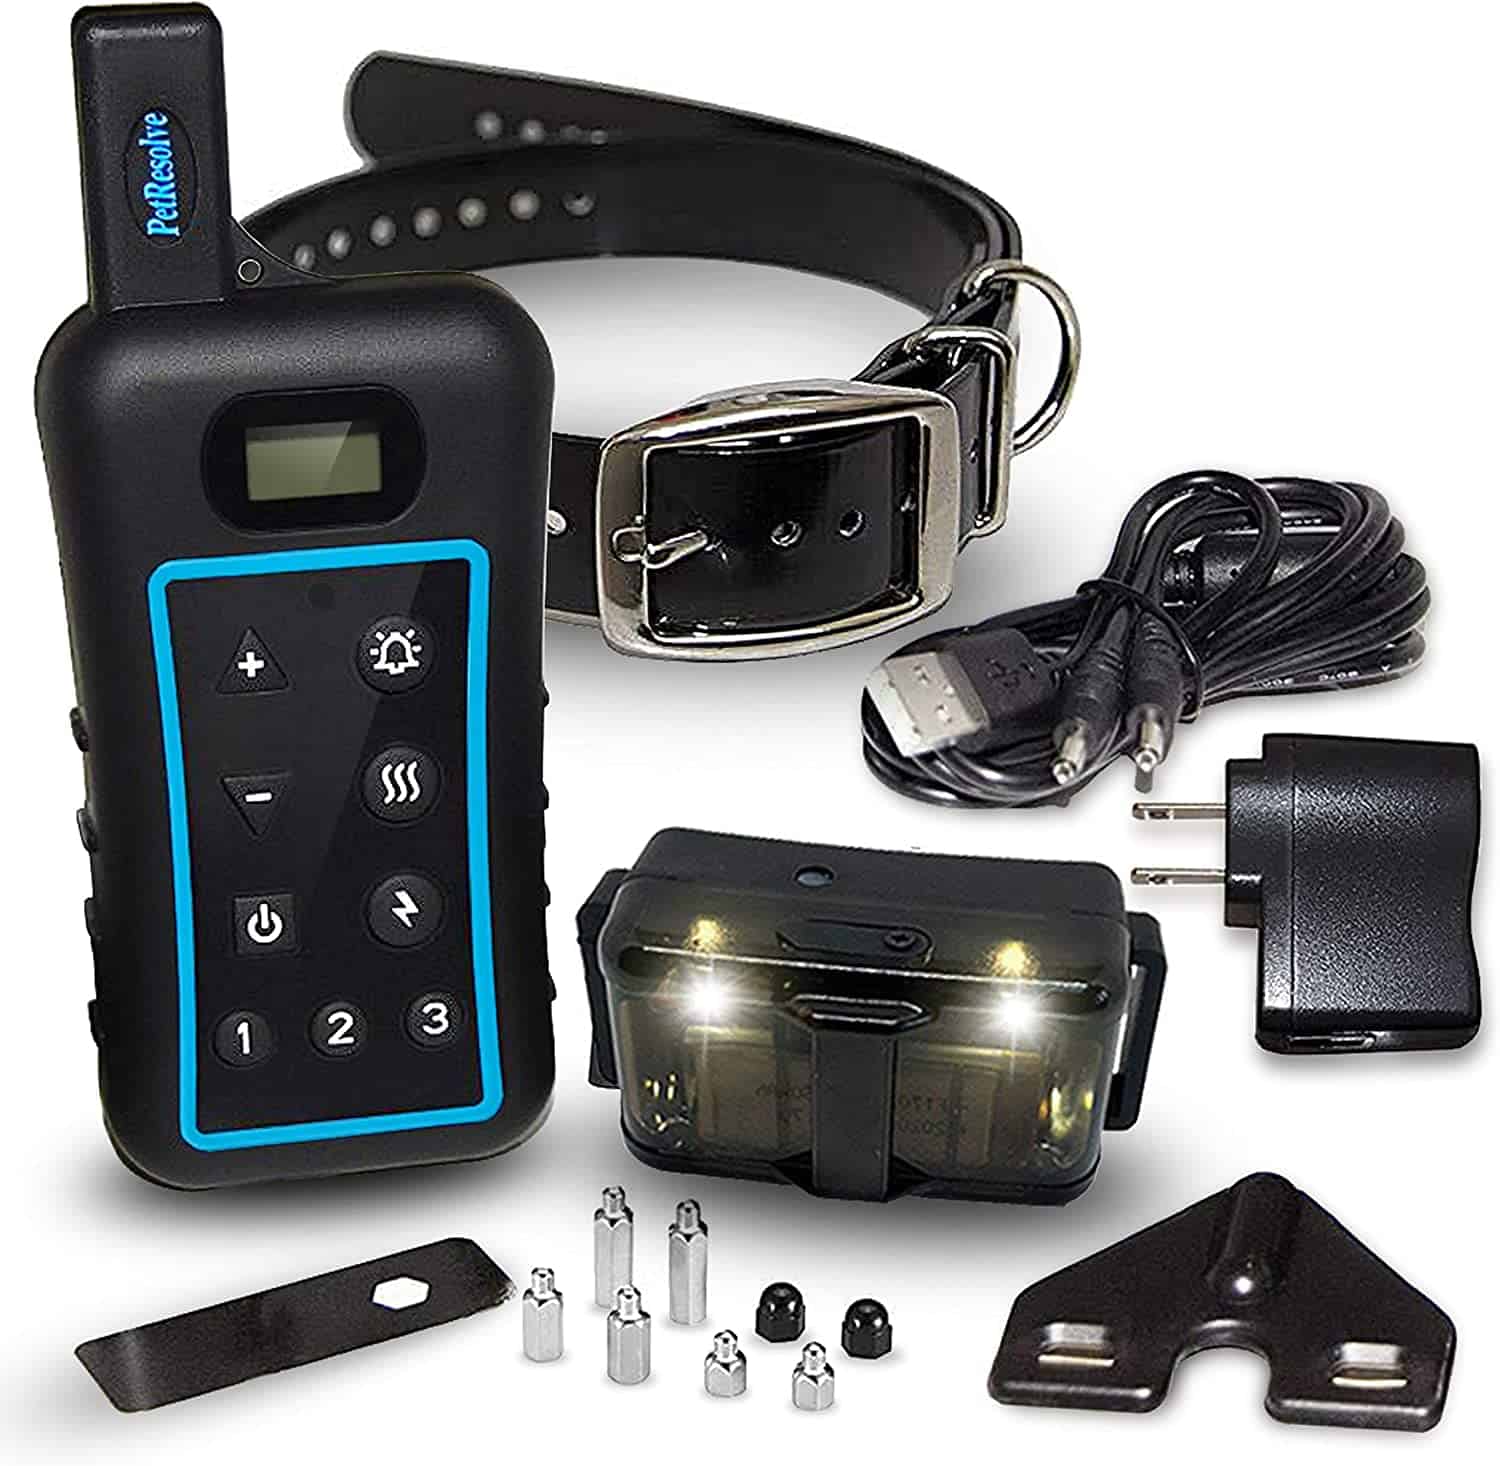 2. Dog Training Collar with Remote